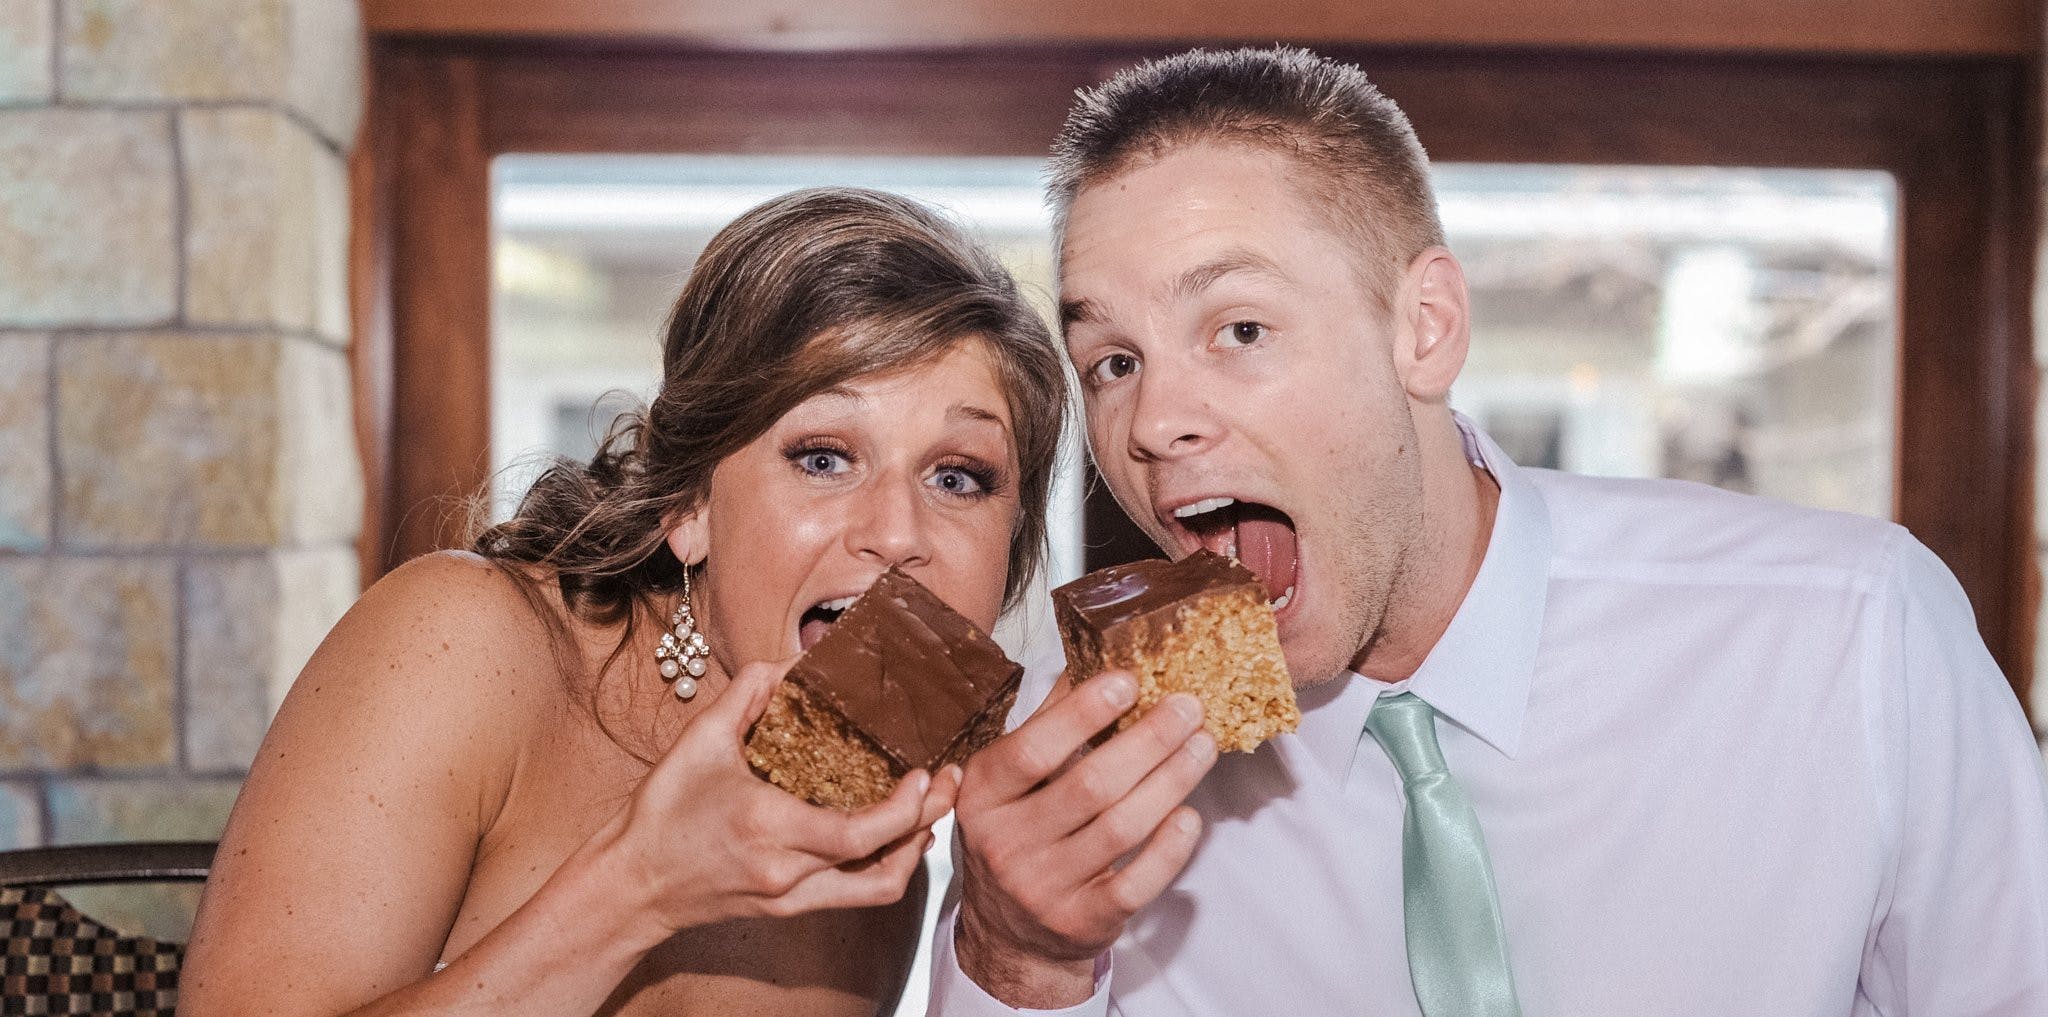 Bride and groom about to bite into chocolate and peanut butter squares